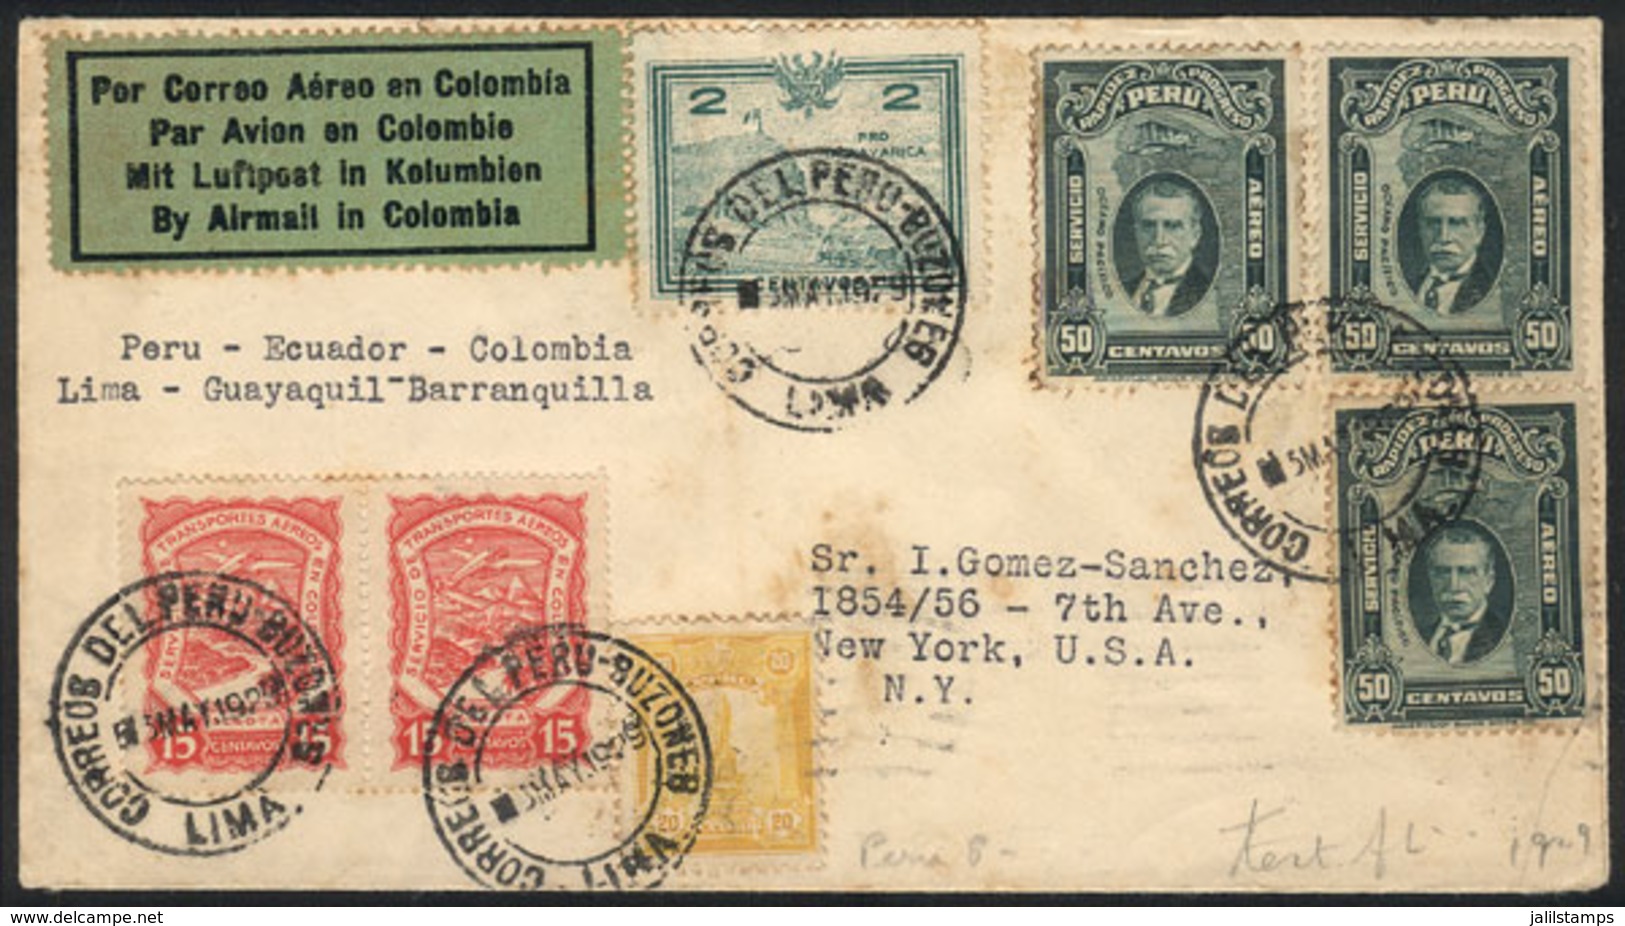 PERU: 3/MAY/1929 Lima - New York, Test Flight Lima - Cristobal (Panama Canal), Cover With Mixed Postage Of Peru And Colo - Peru